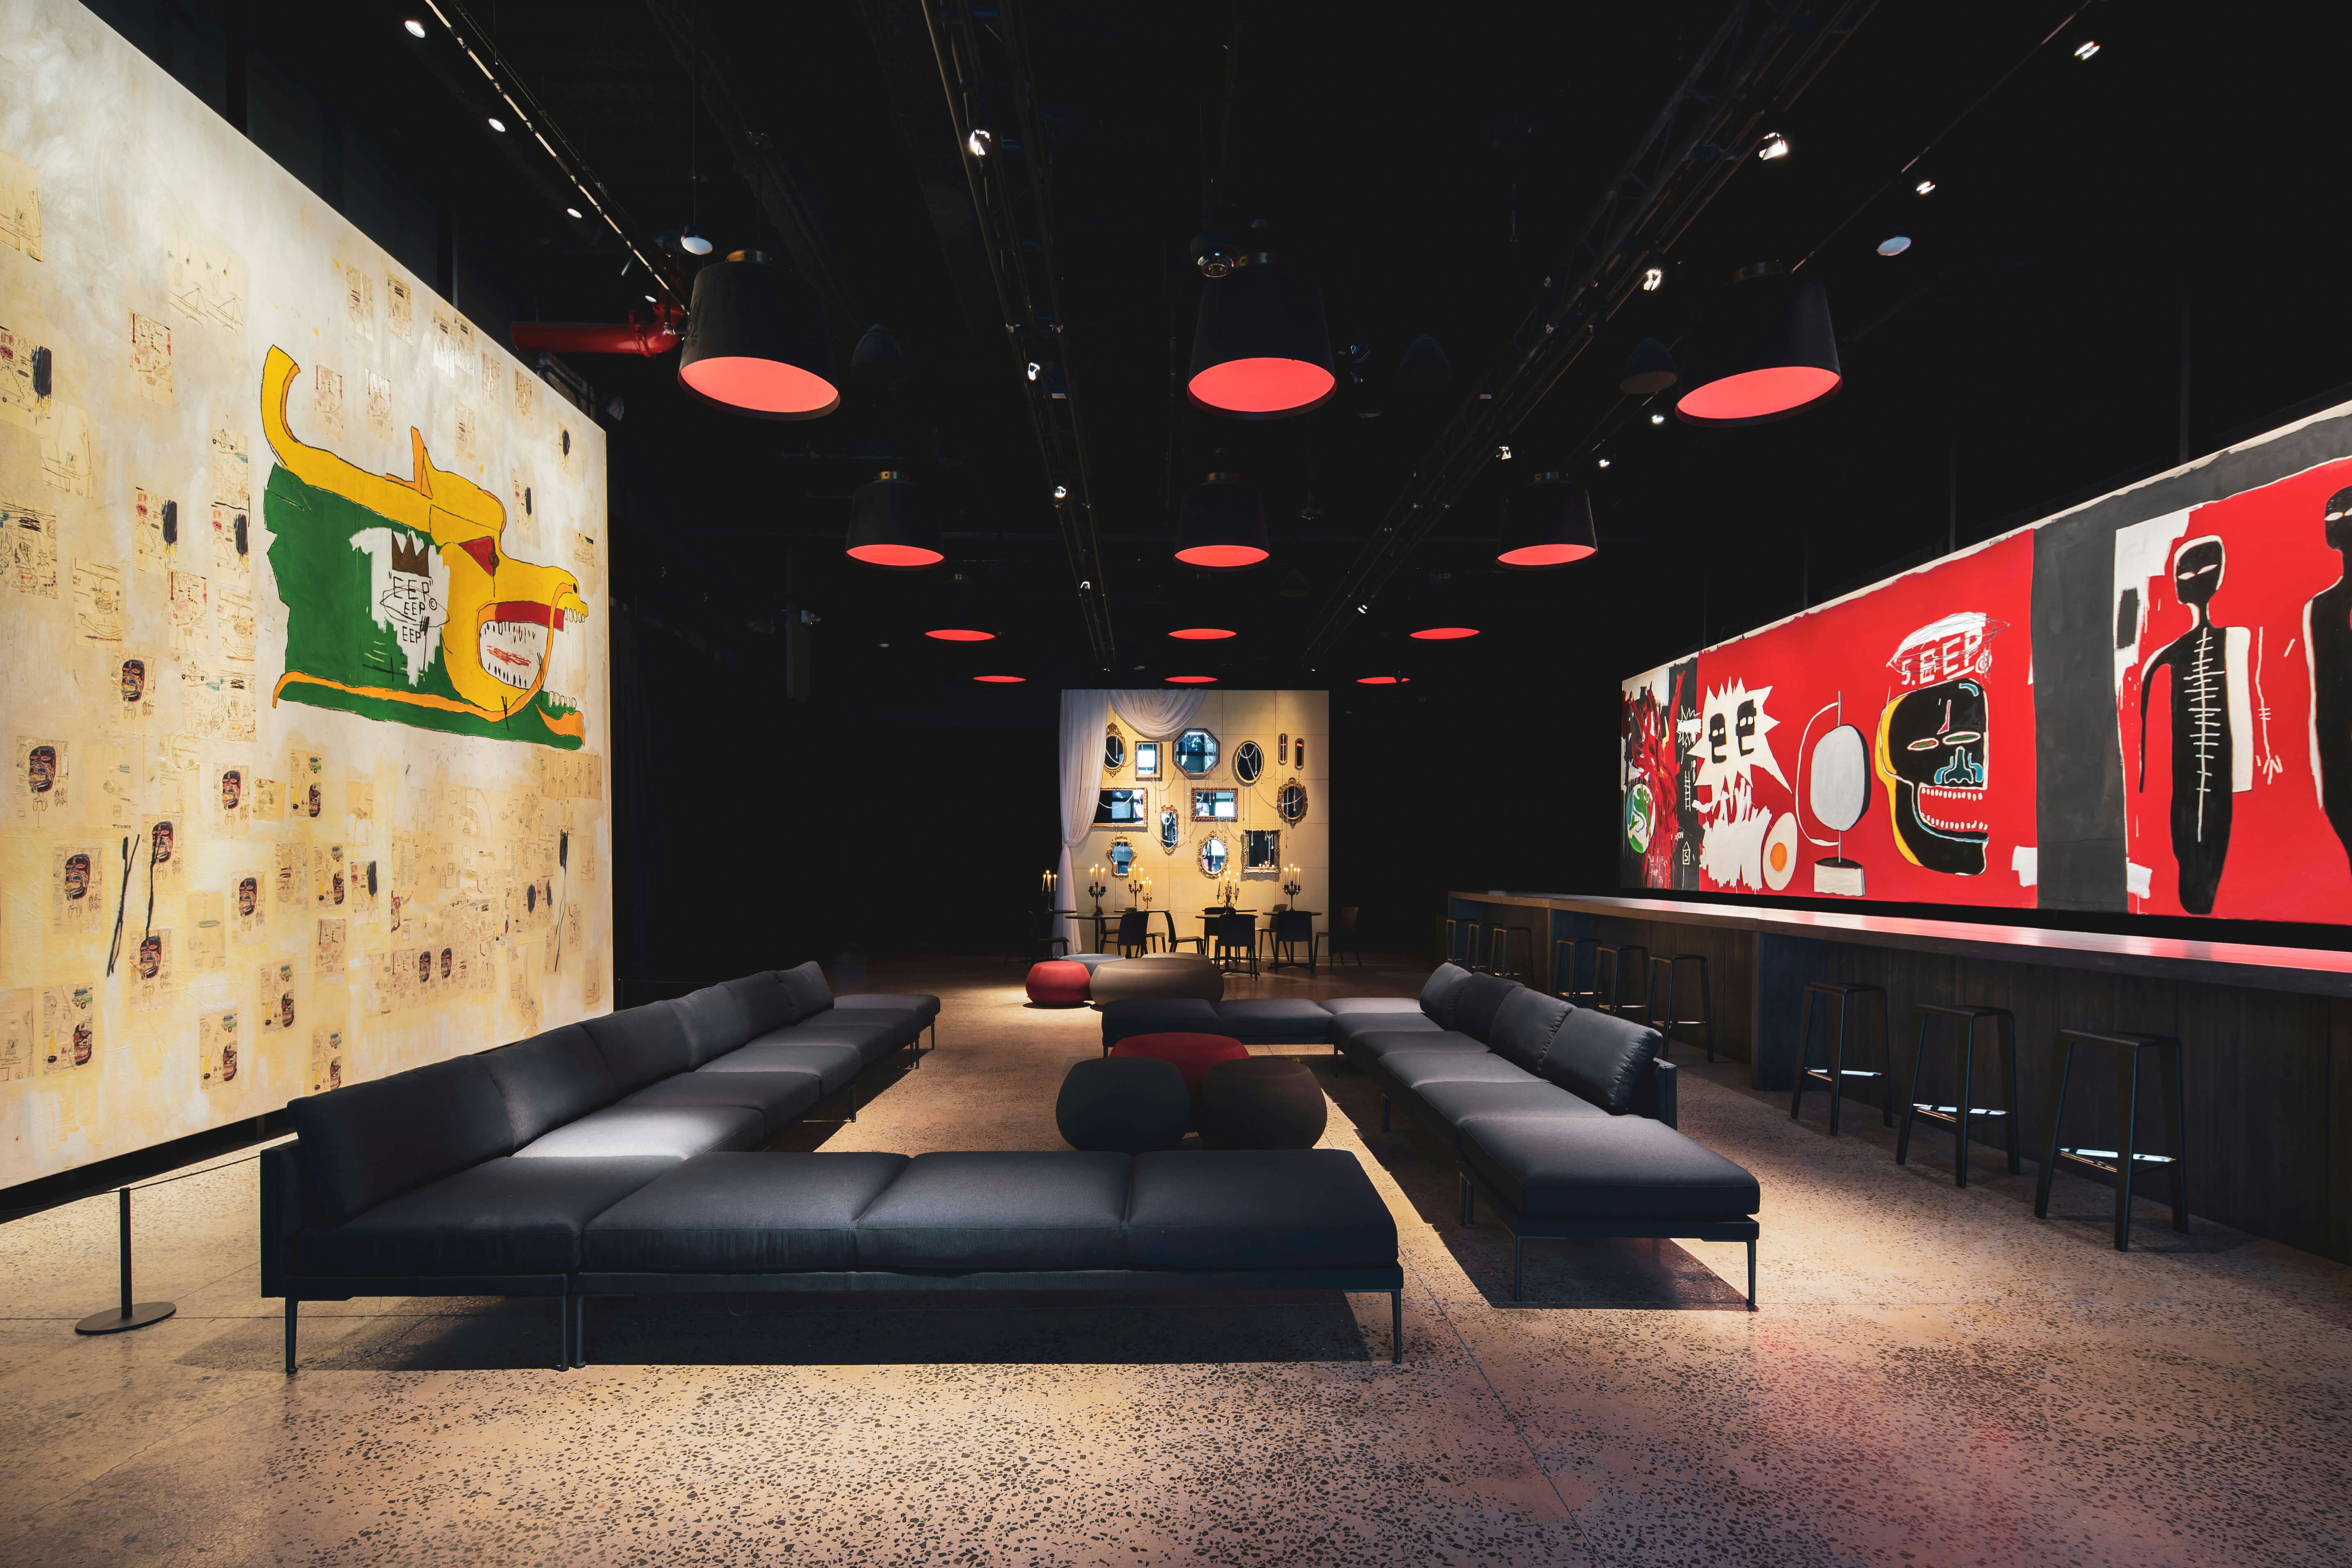 Recreation of the Michael Todd VIP Room of NYC’s iconic Palladium nightclub, for which Basquiat created two paintings. Round red pendant lamps overhead, a bar with high stools and a large red piece on the right, a huge white piece on the left, and low-slung black sofas in the middle